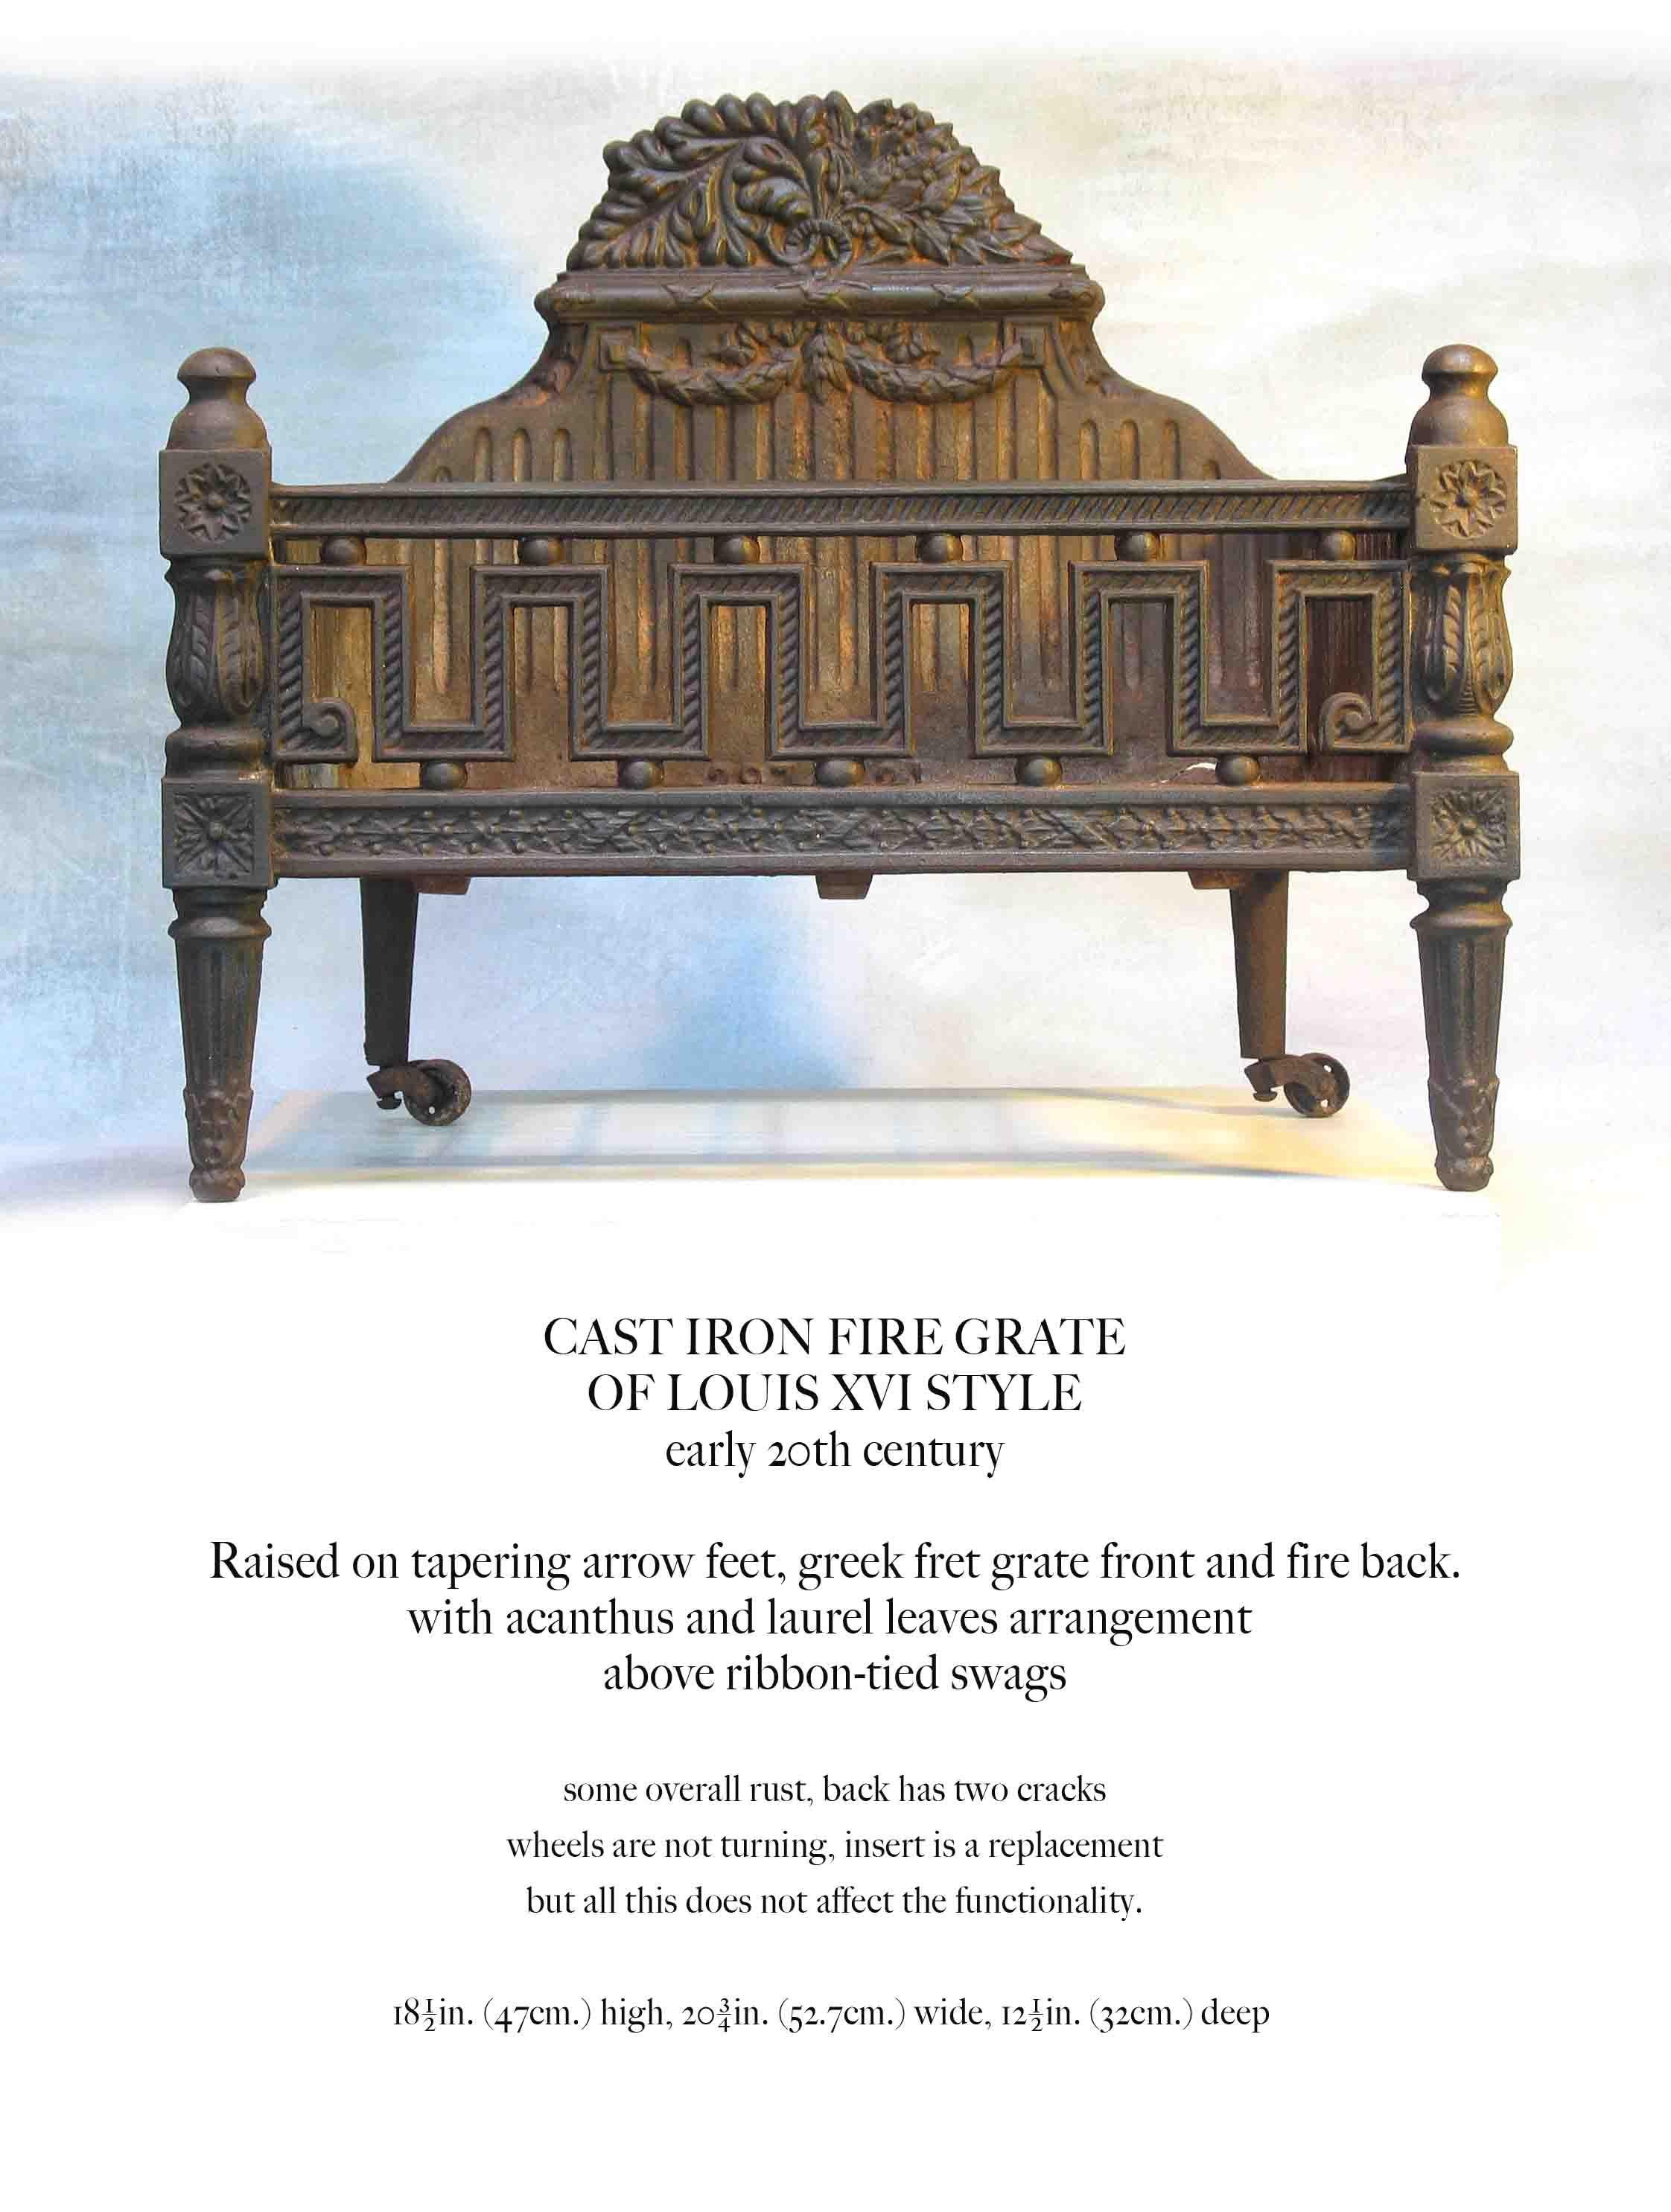 Cast iron fire grate
of Louis XVI style
Early 20th century.

Raised on tapering arrow feet, greek fret grate front and fire back,
with acanthus and laurel leaves arrangement 
above ribbon-tied swags.

Some overall rust, back has two